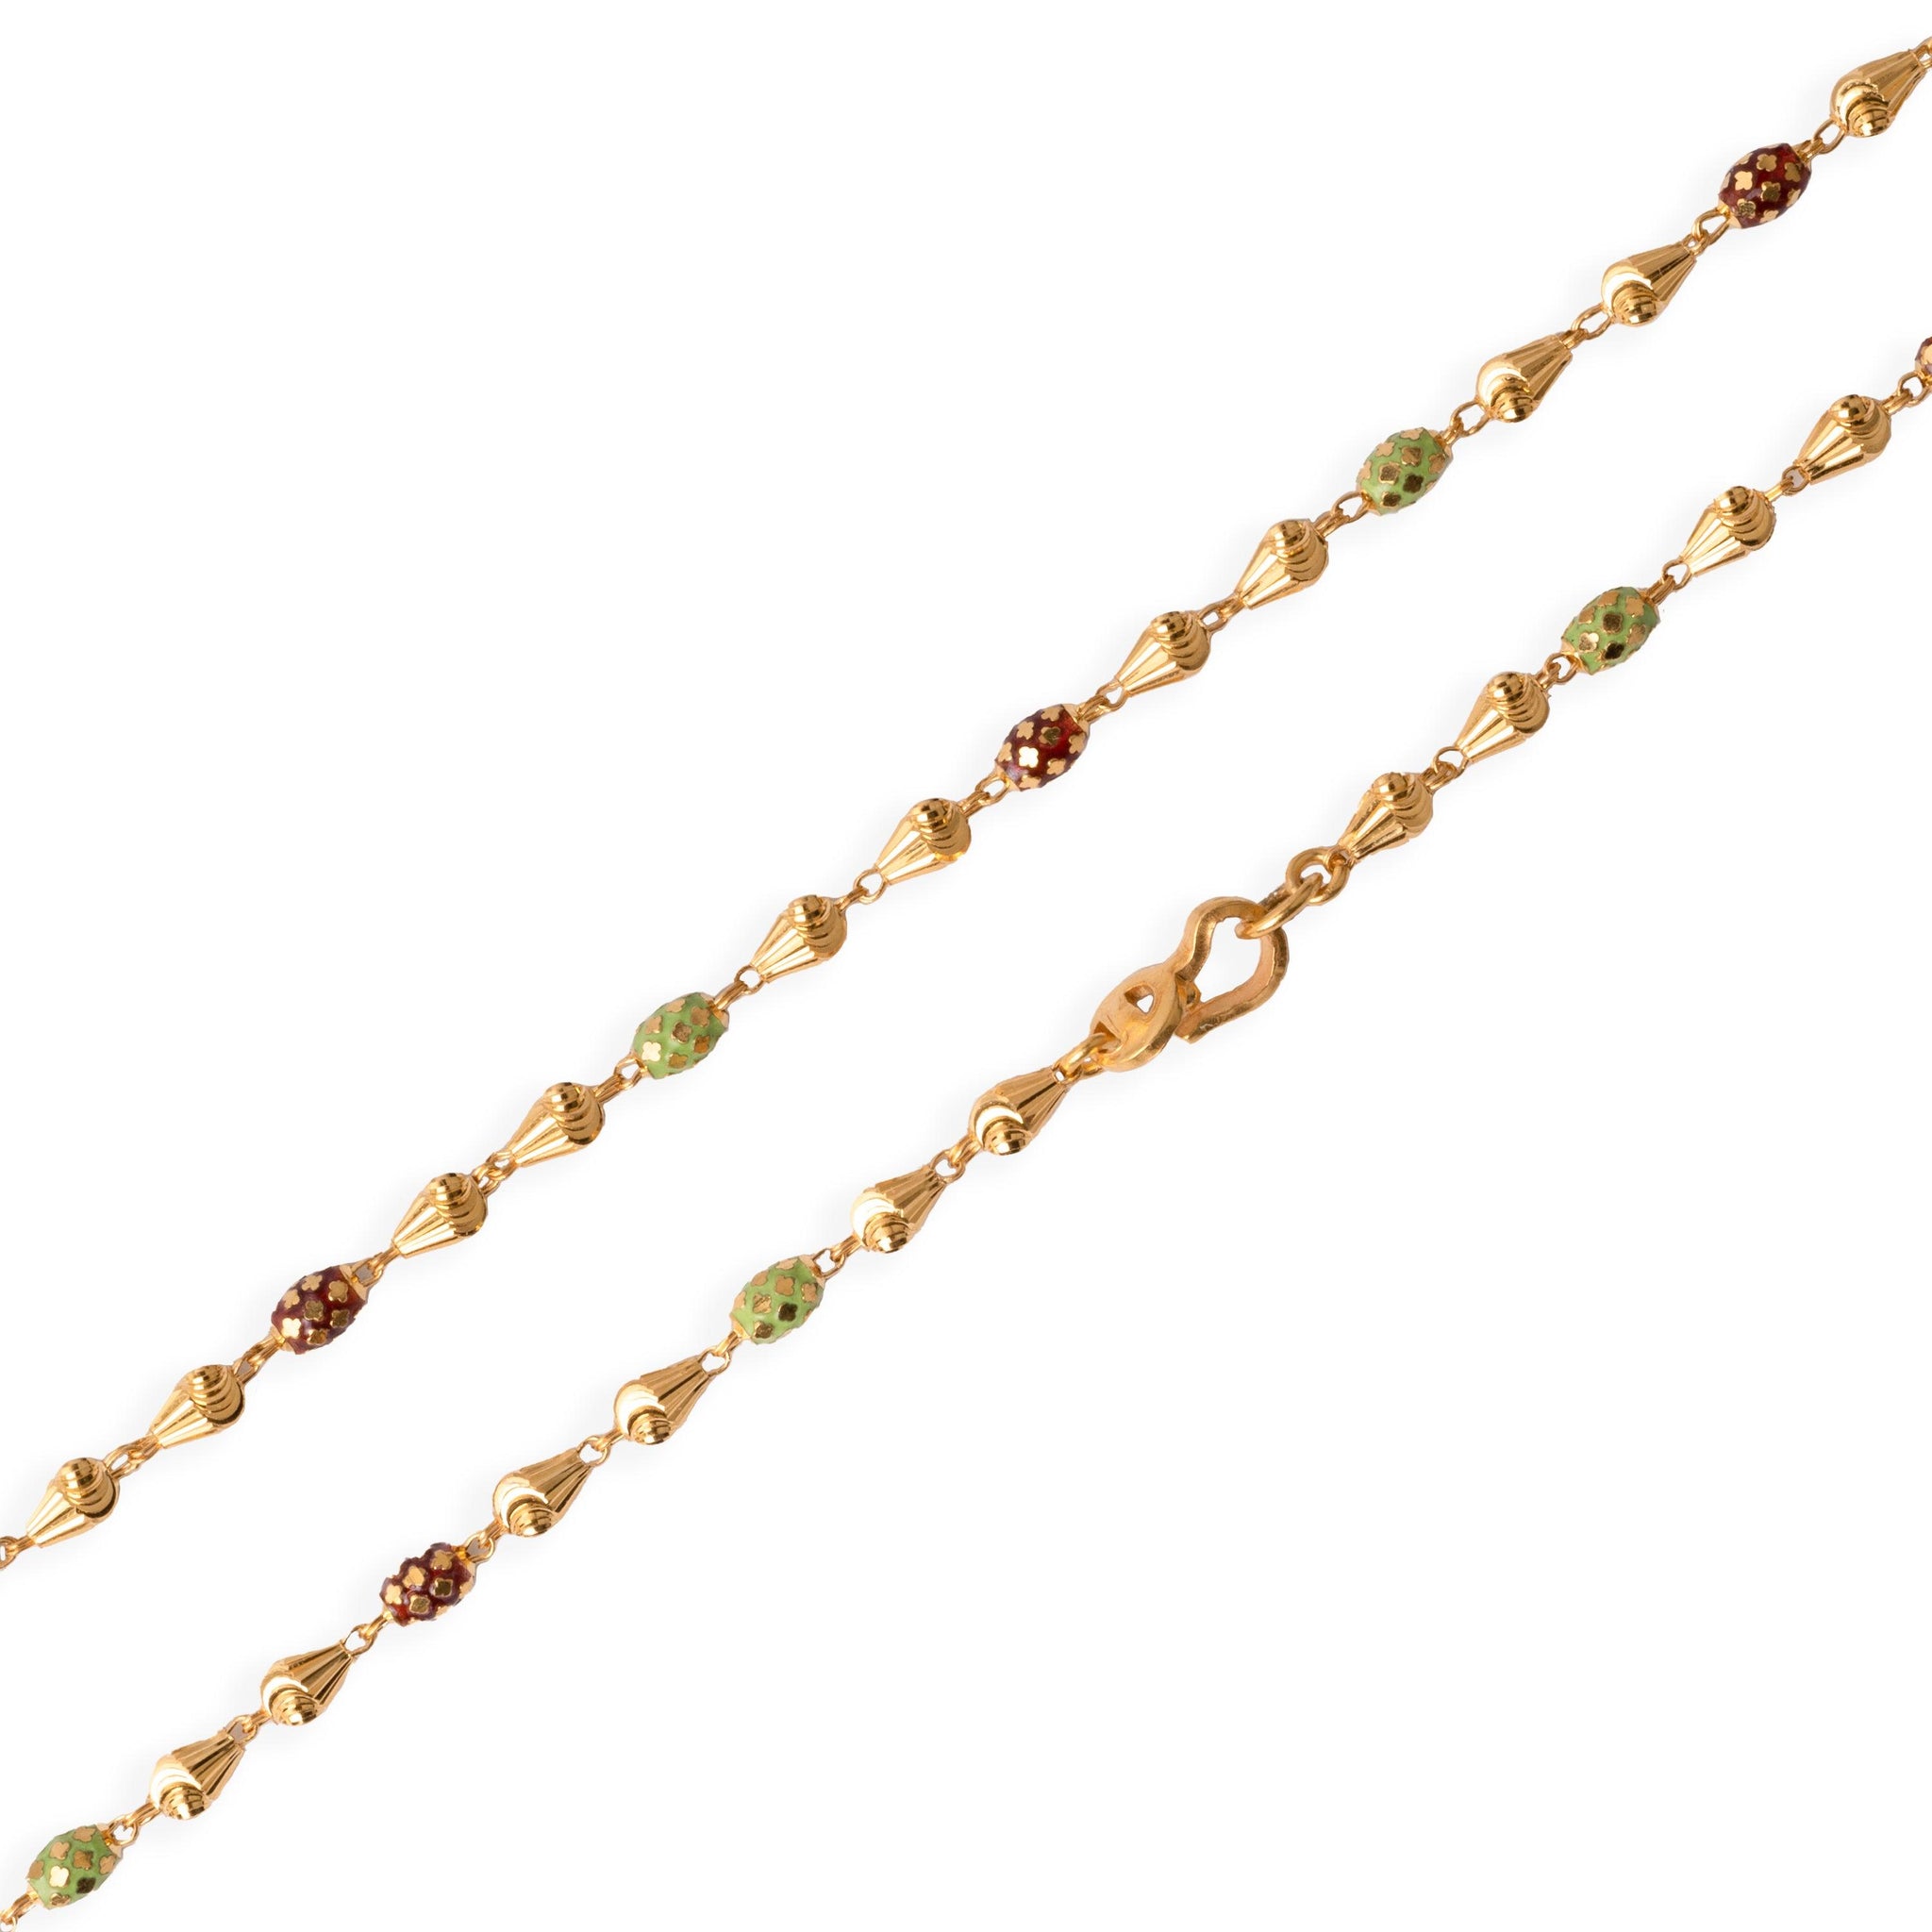 22ct Gold Beaded Necklace with Enamel Design and Hook Clasp (12.5g) C-7131